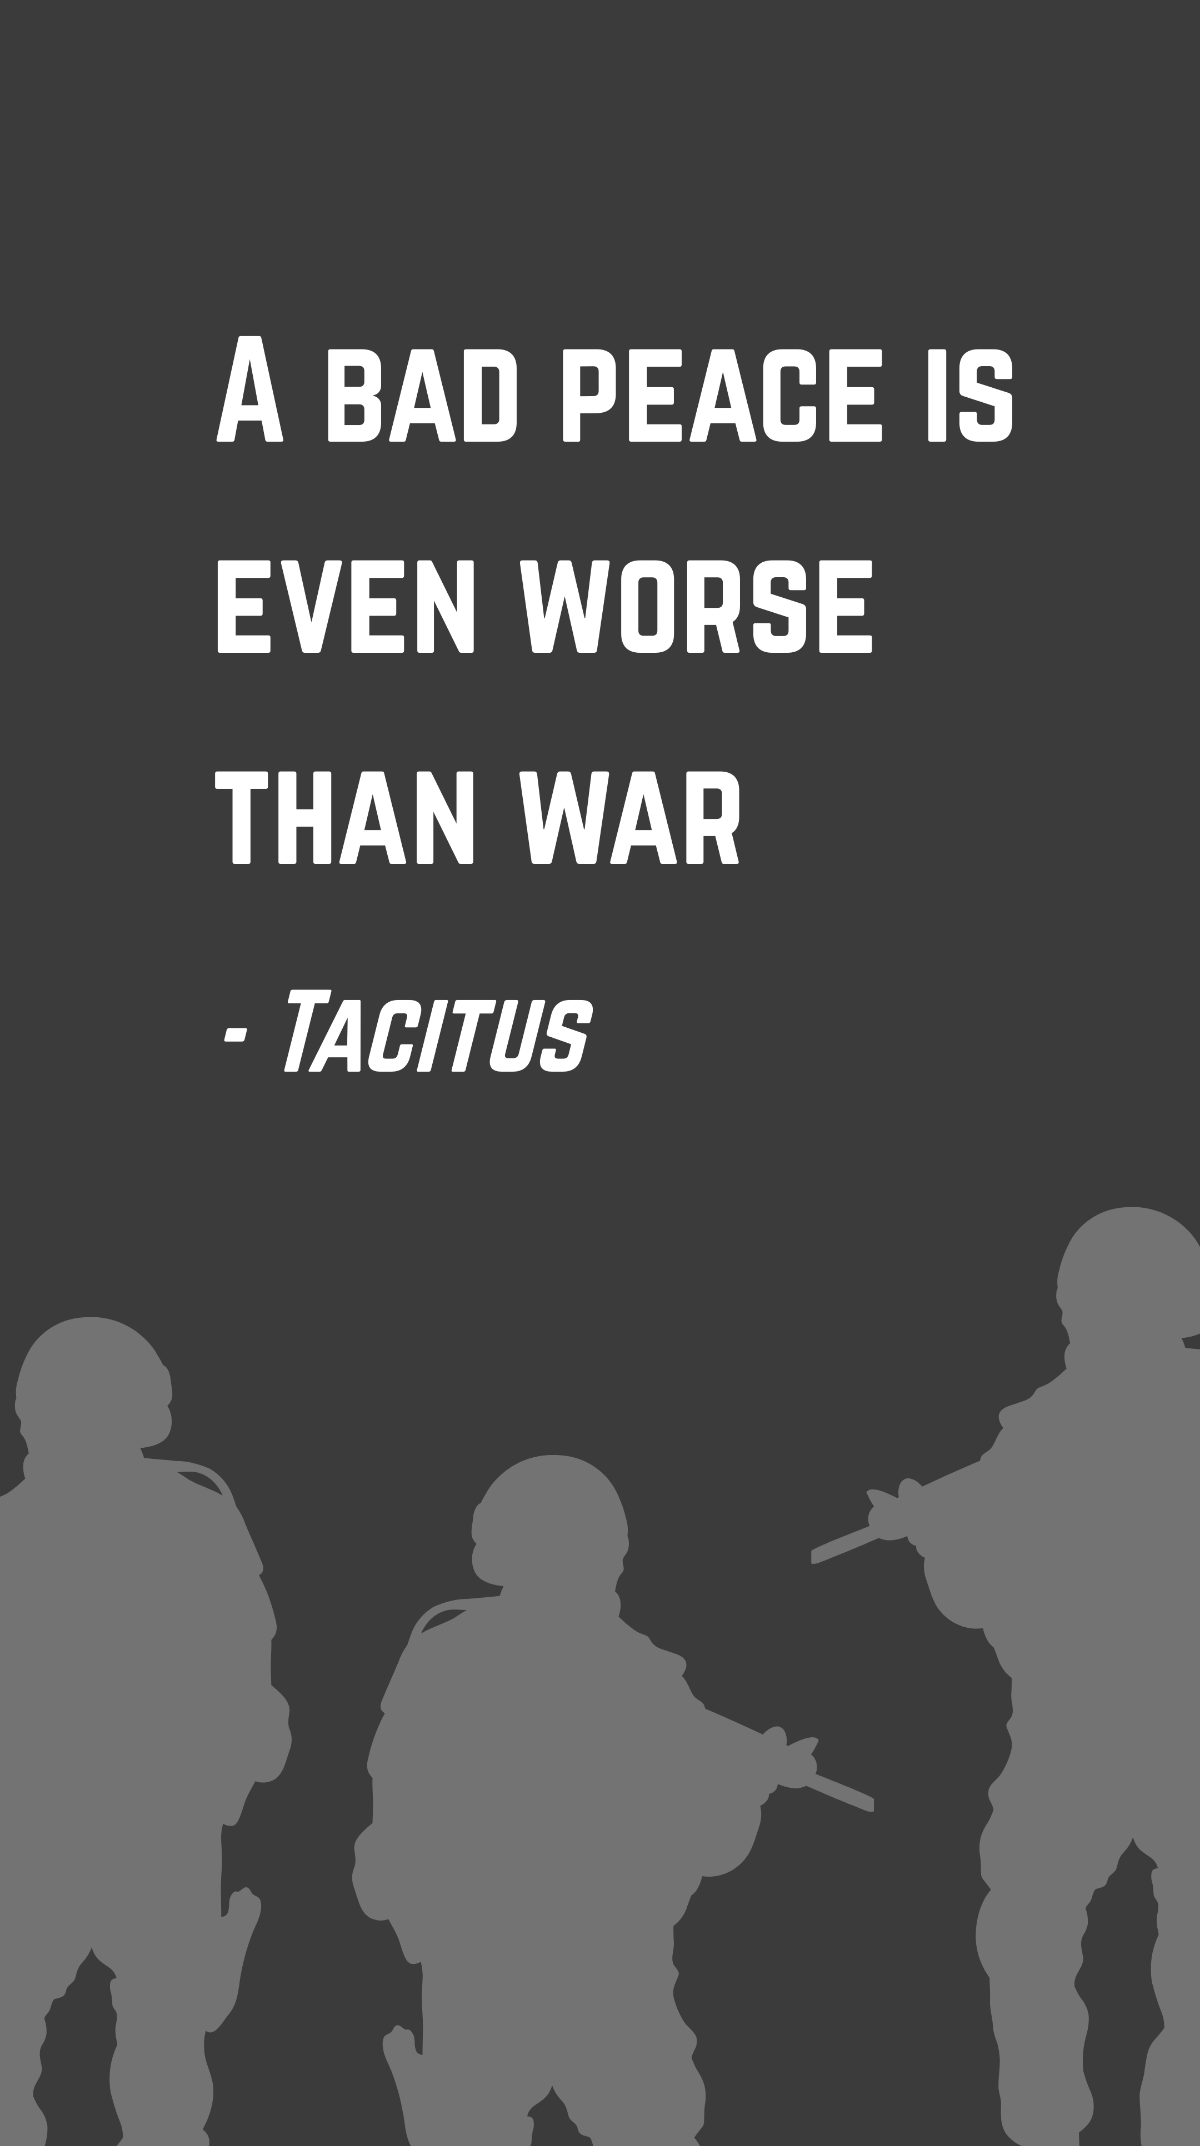 Free Tacitus - A bad peace is even worse than war Template